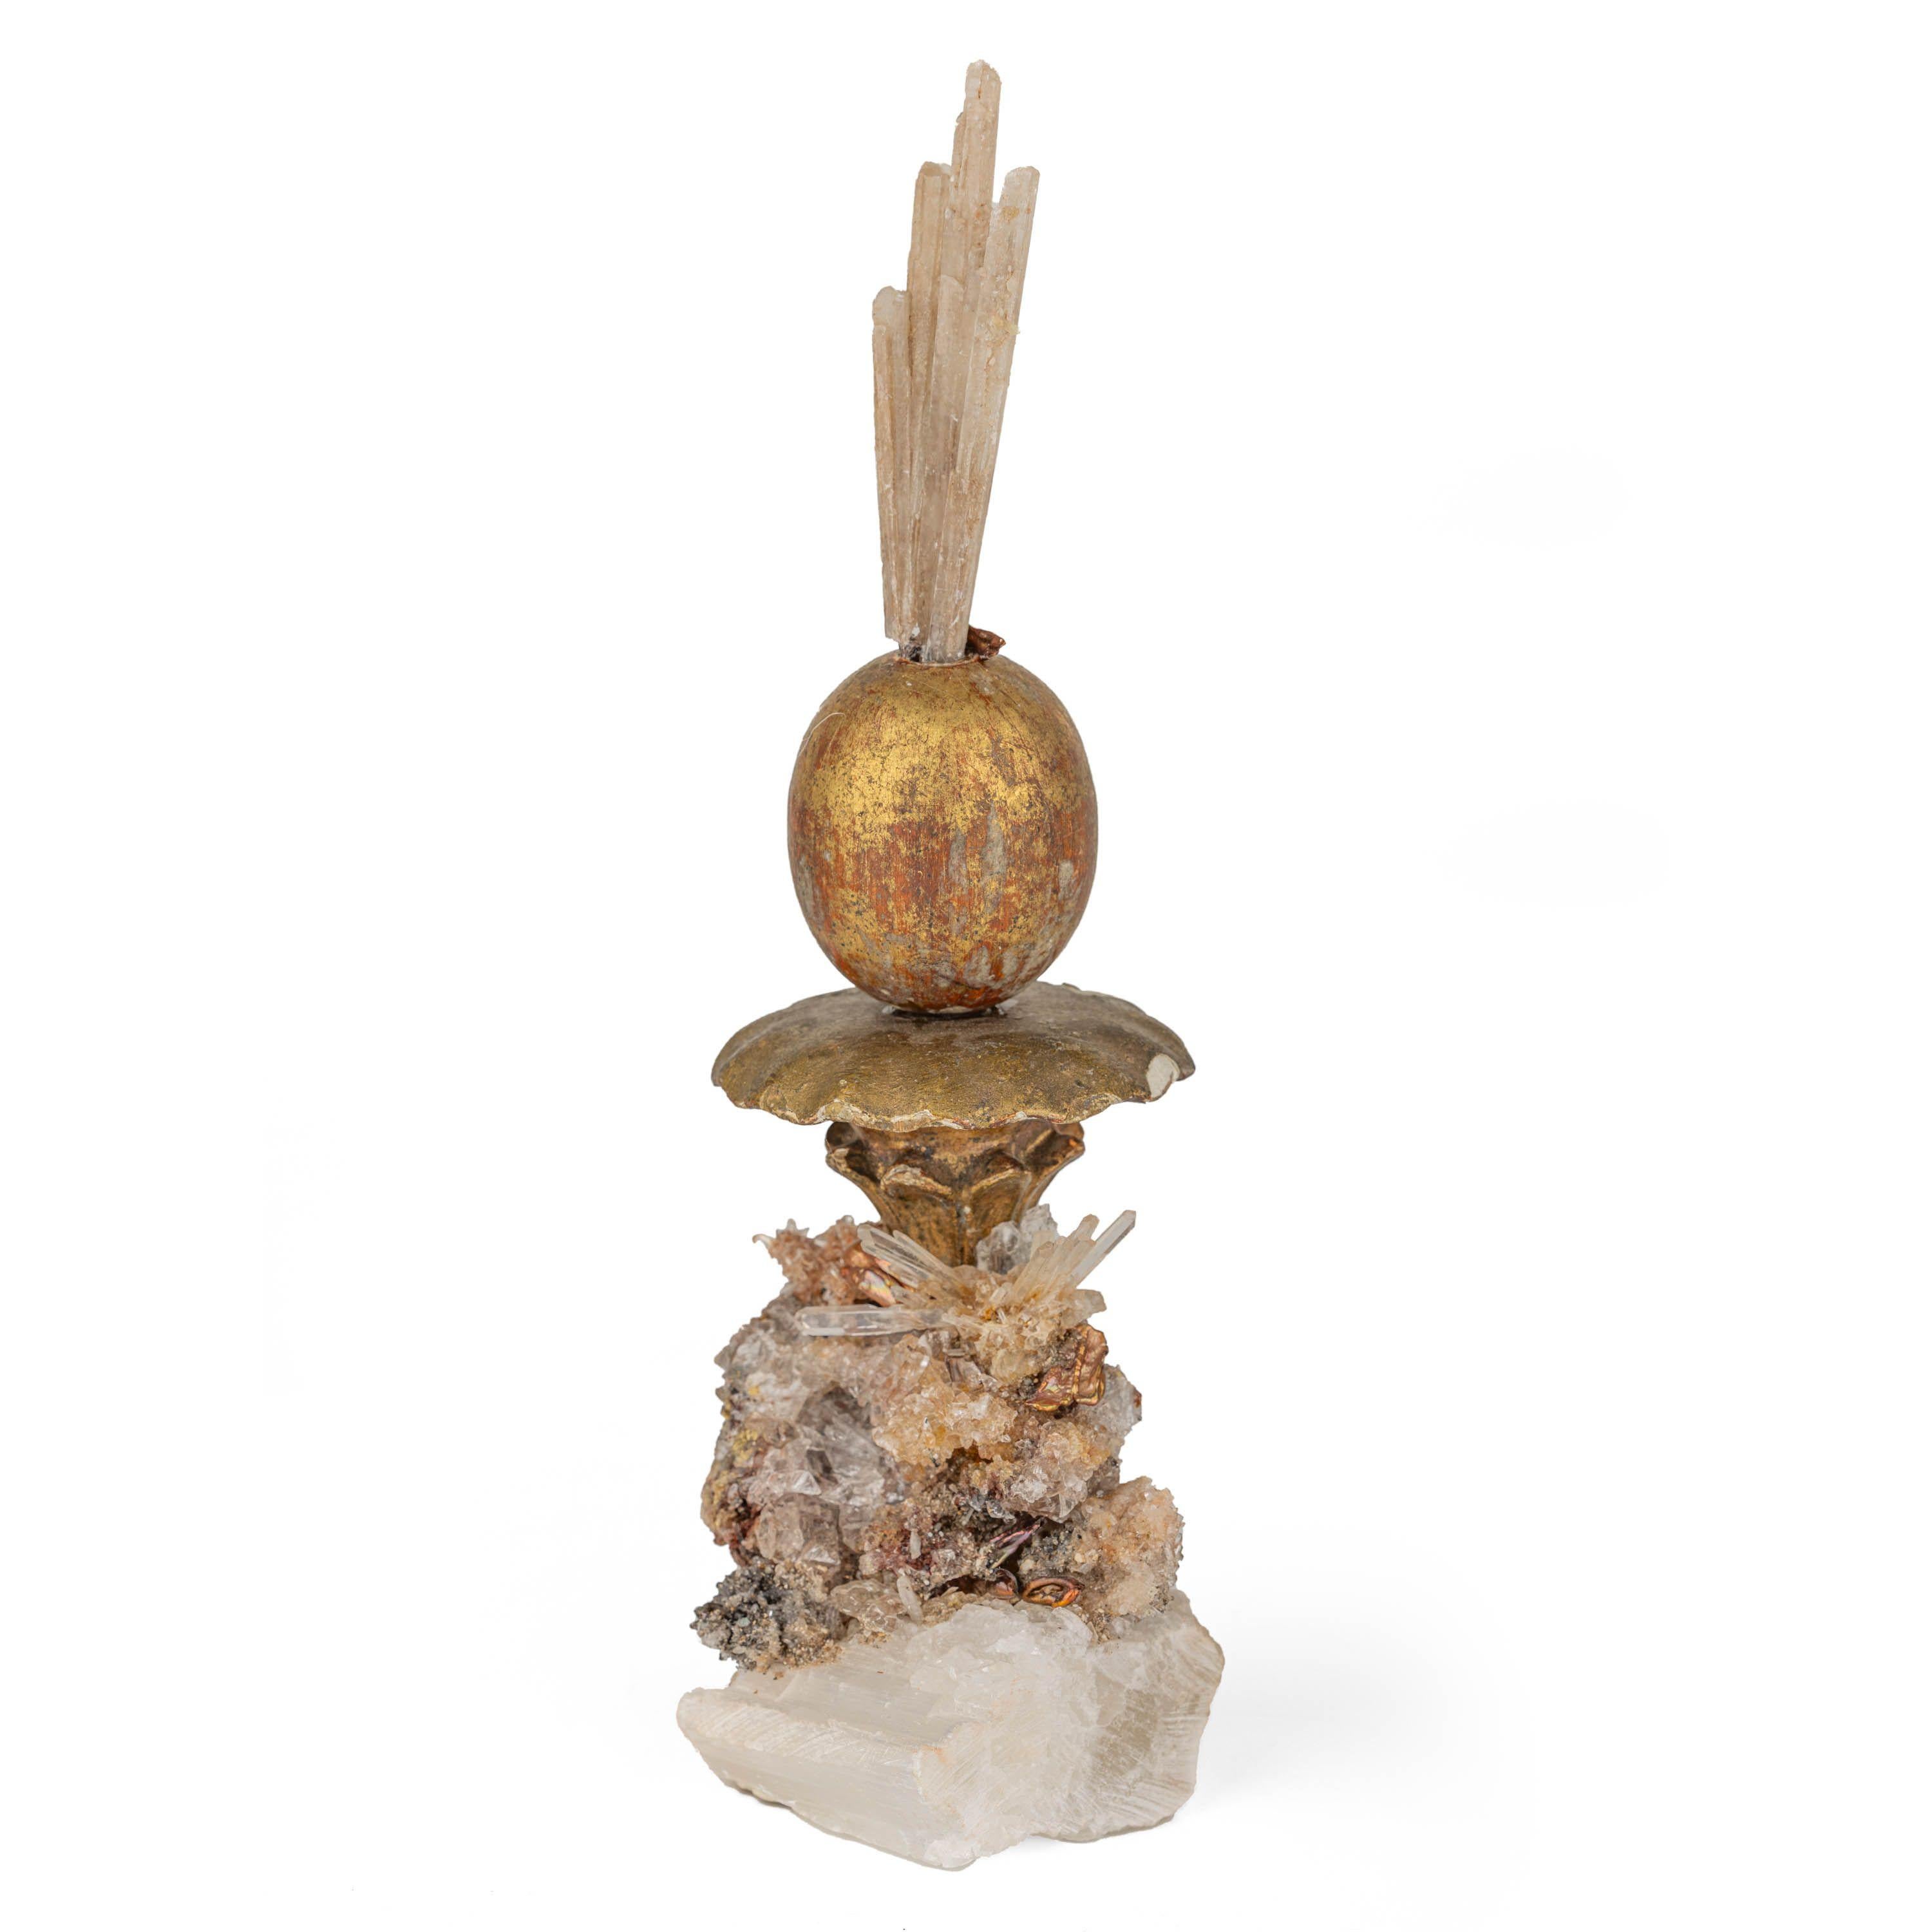 18th & 19th Century Gilded Fragments. Orb is water gilt, carved wood sitting atop a gilded plaster flower. All are embellished with natural seed pearls, rock crystal and selenite fragments. The base is a nice chunk of natural selenite. One of a kind